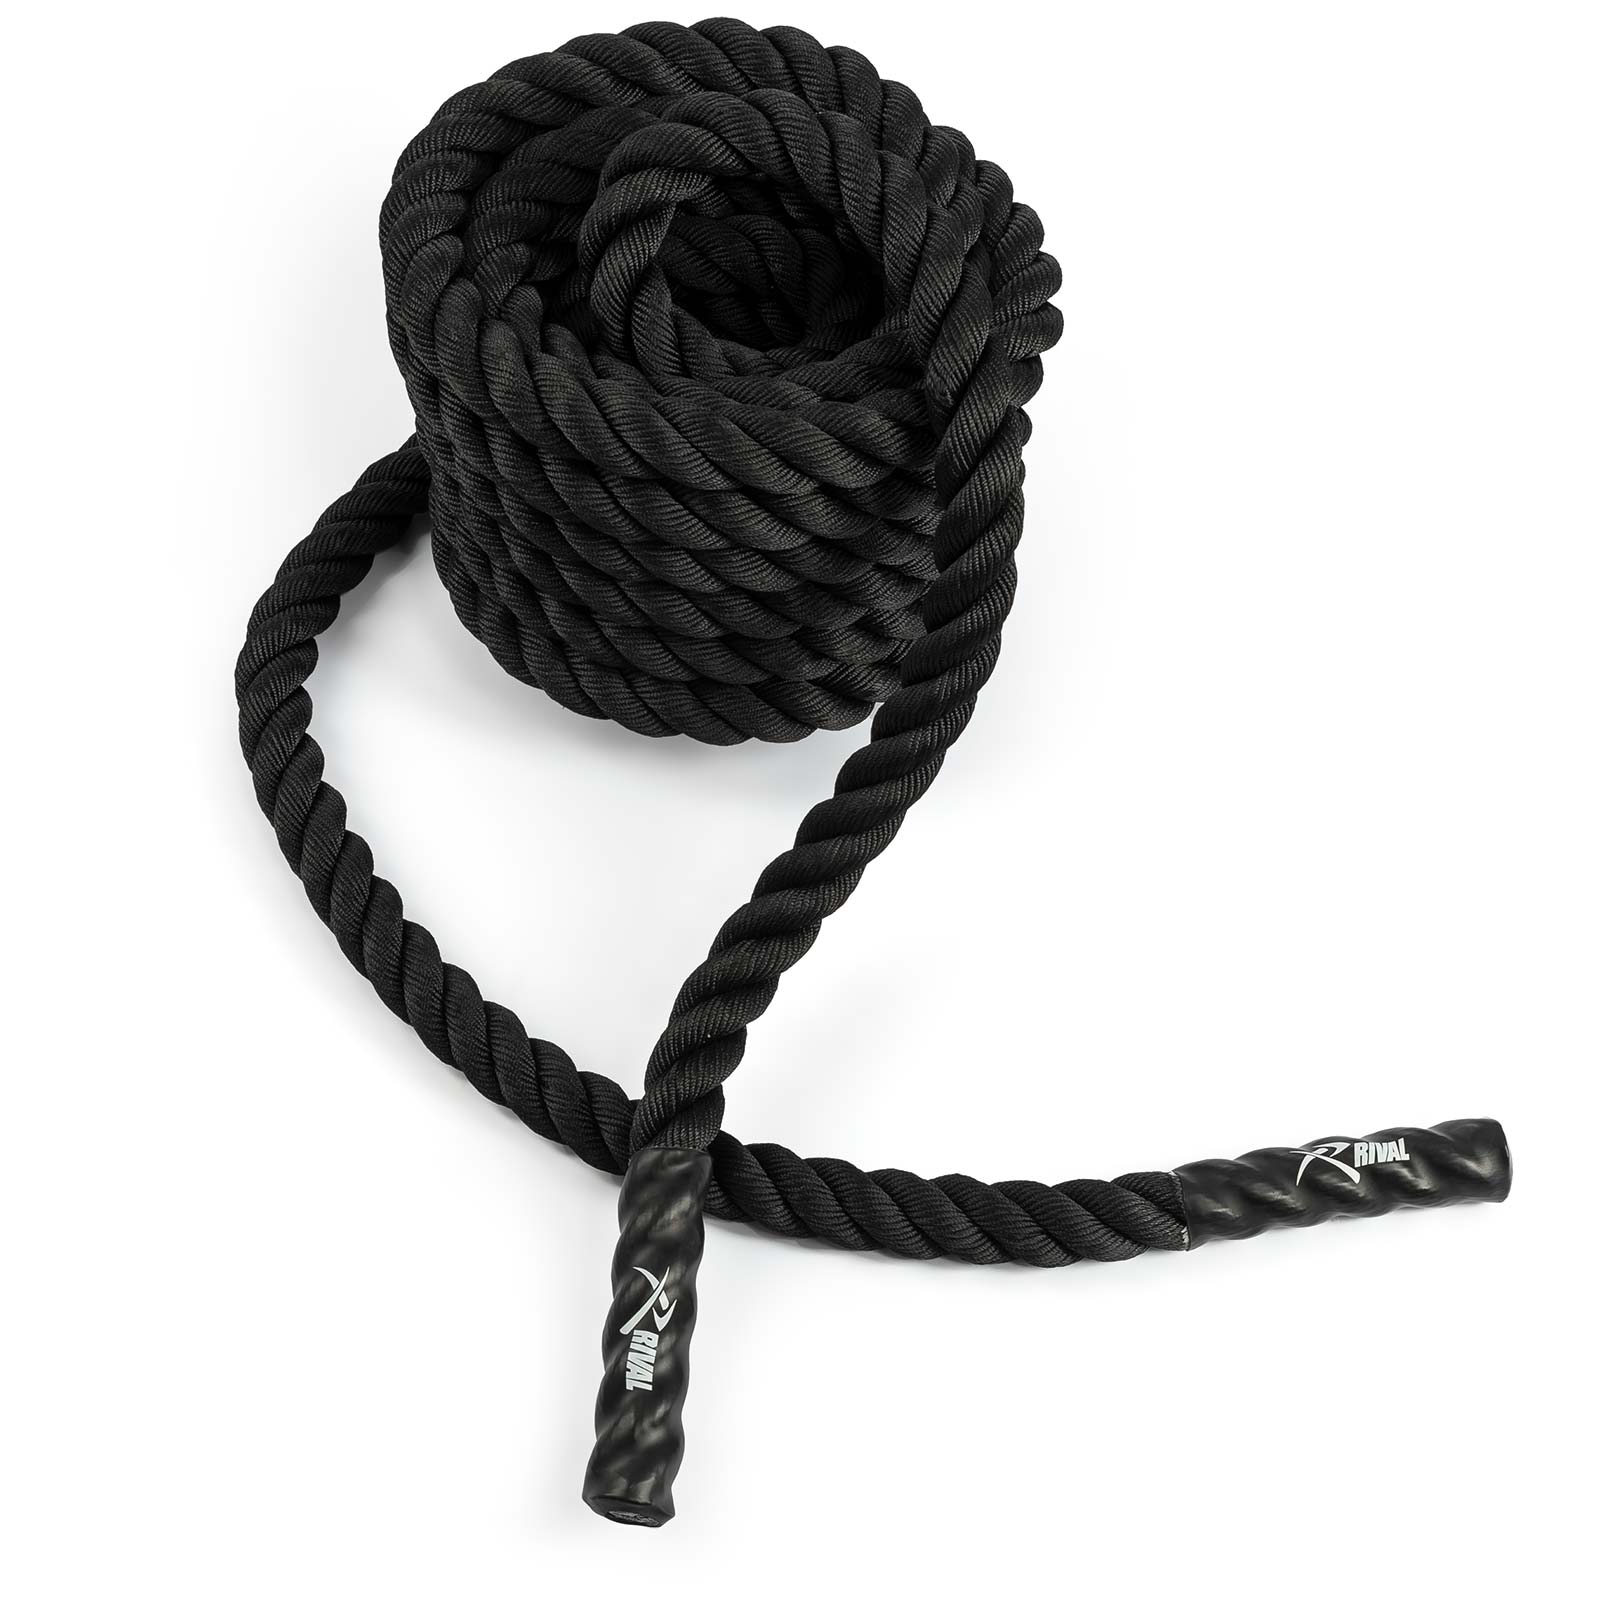 RIVAL 15M BATTLE ROPE